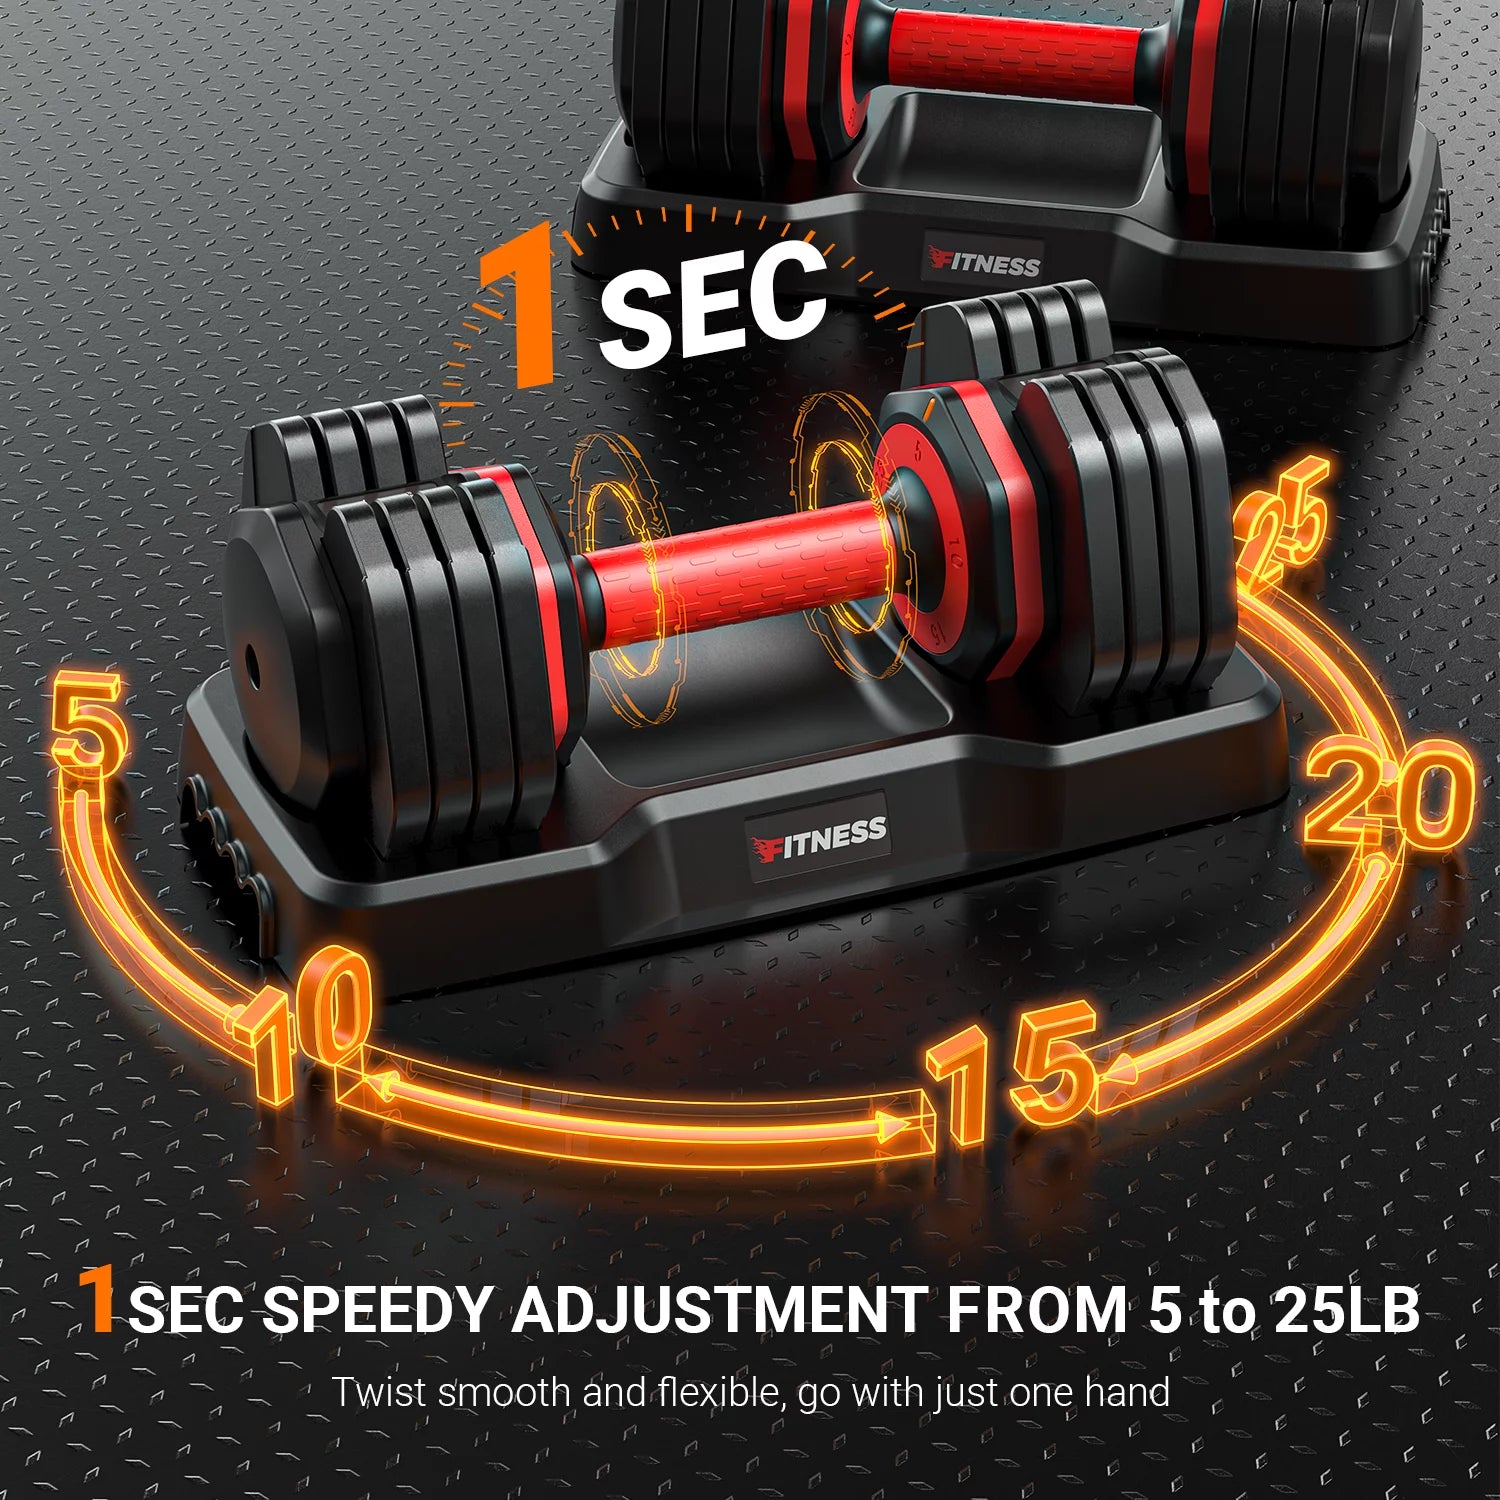 110LB(55LB*2) Adjustable Dumbbells Set 5 in 1, 55Lb Dumbells Set of 2 Adjustable Free Weights Plates and Rack for Women and Men - Adjust Weight for Home Gym Full Body Workout Fitness